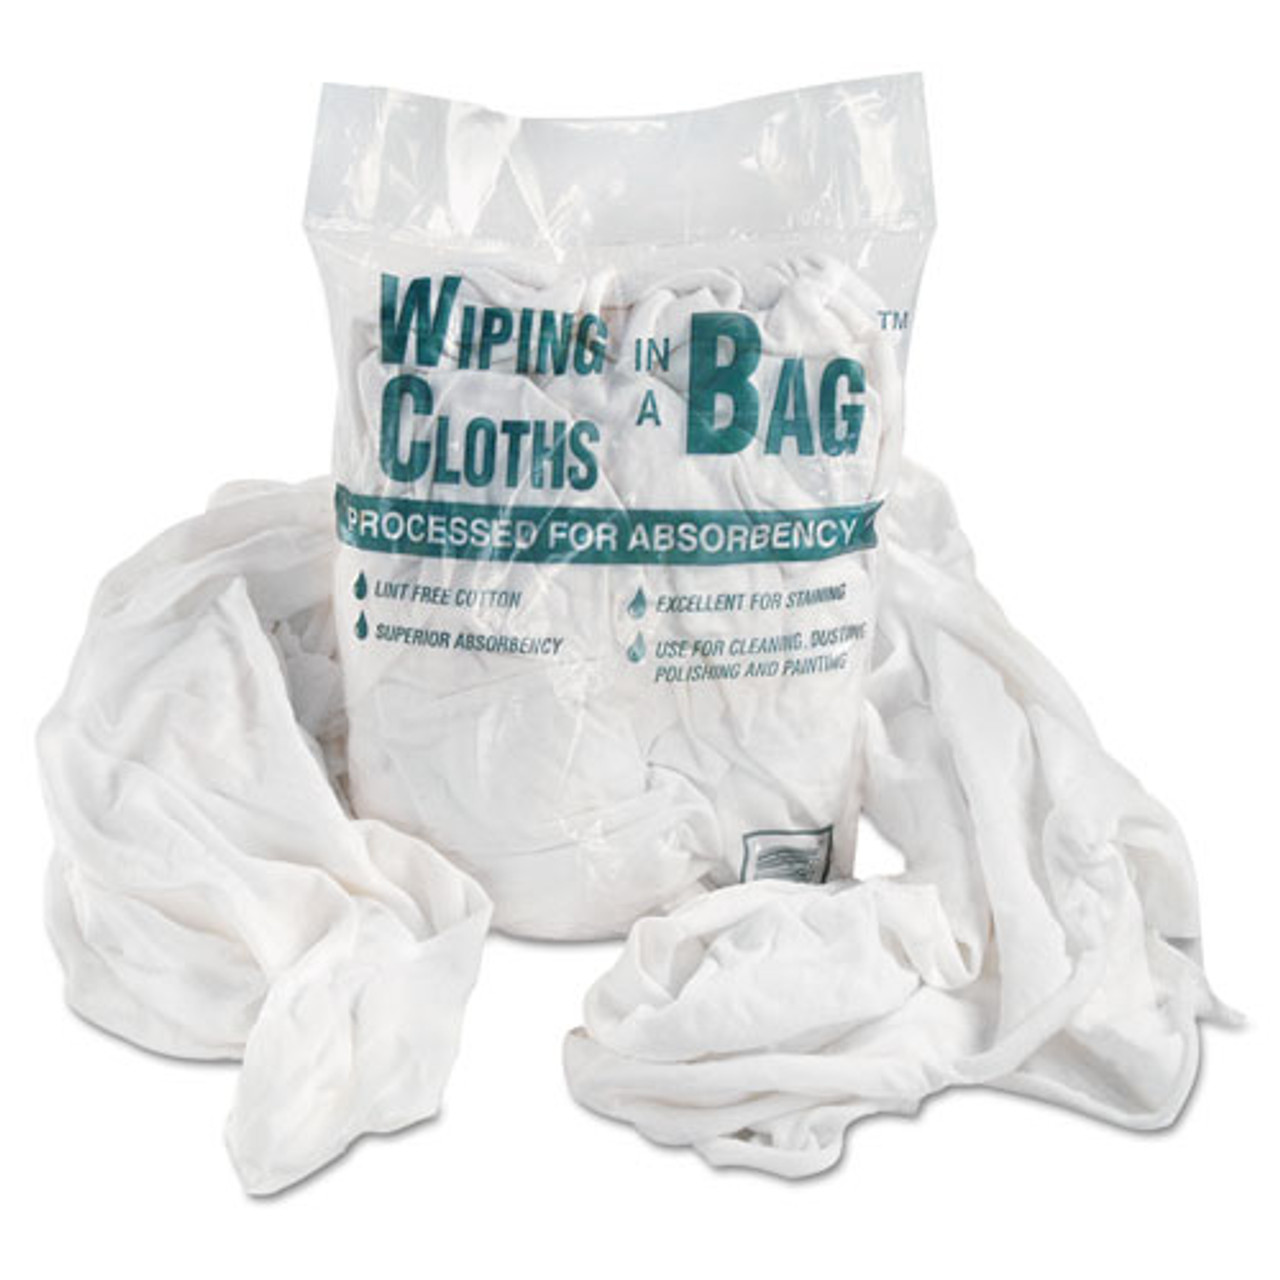 White Knit T-Shirt 100% Cotton Cleaning Rags 25 lbs. Bag- Multipurpose